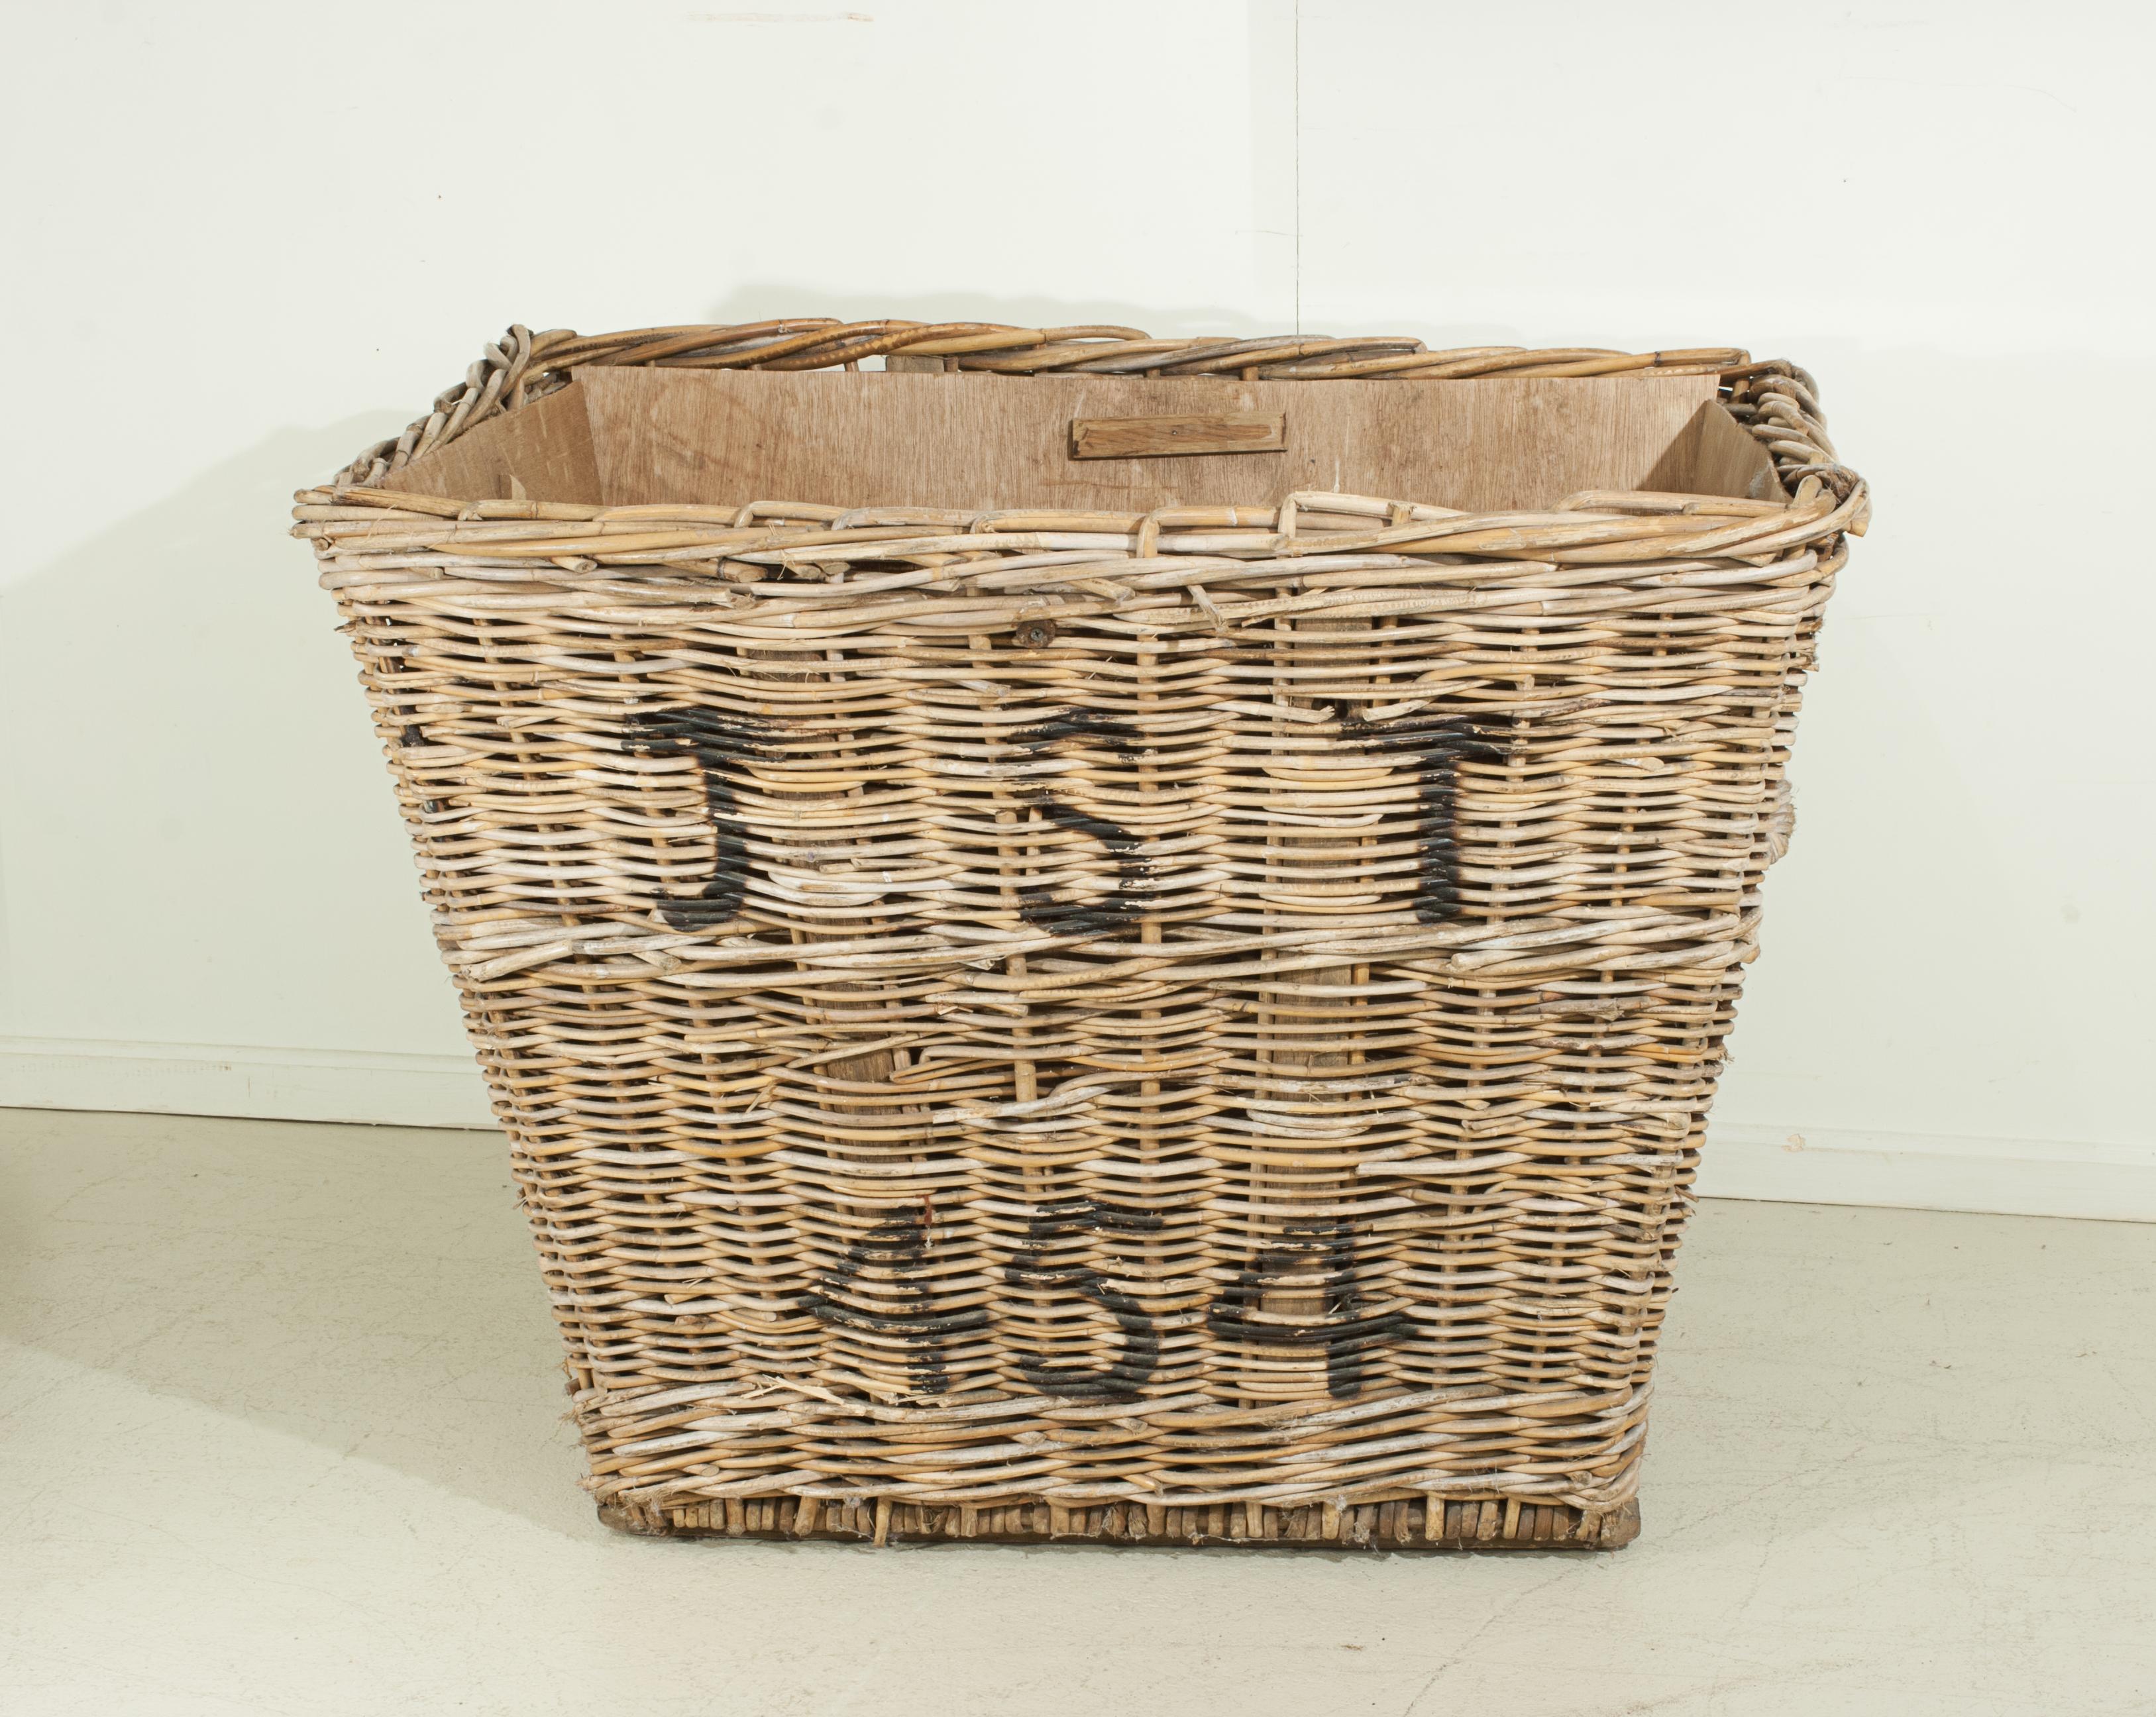 Large industrial Wicker basket. Fire wood or log basket.
A large early 20th century English rectangular willow wicker basket. The basket topped with a twisted trim, tapering sides and wooden runners. The front stenciled with 'JST 454', this could